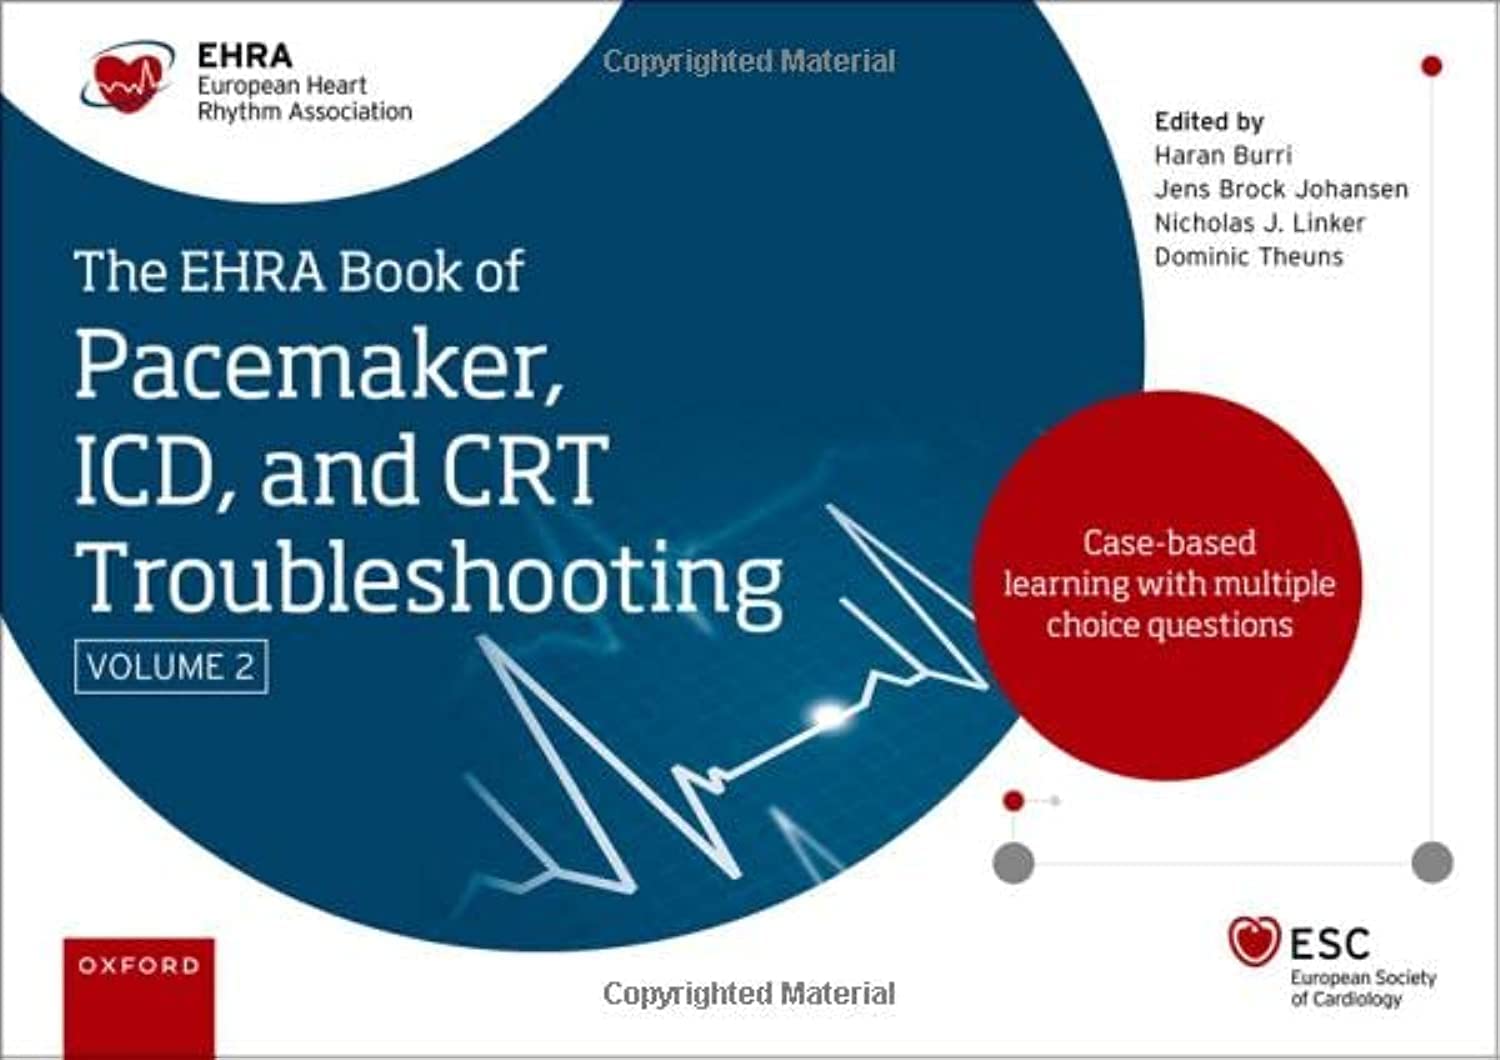 The EHRA Book of Pacemaker, ICD and CRT Troubleshooting Vol. 2 - (AIBH Exclusive)